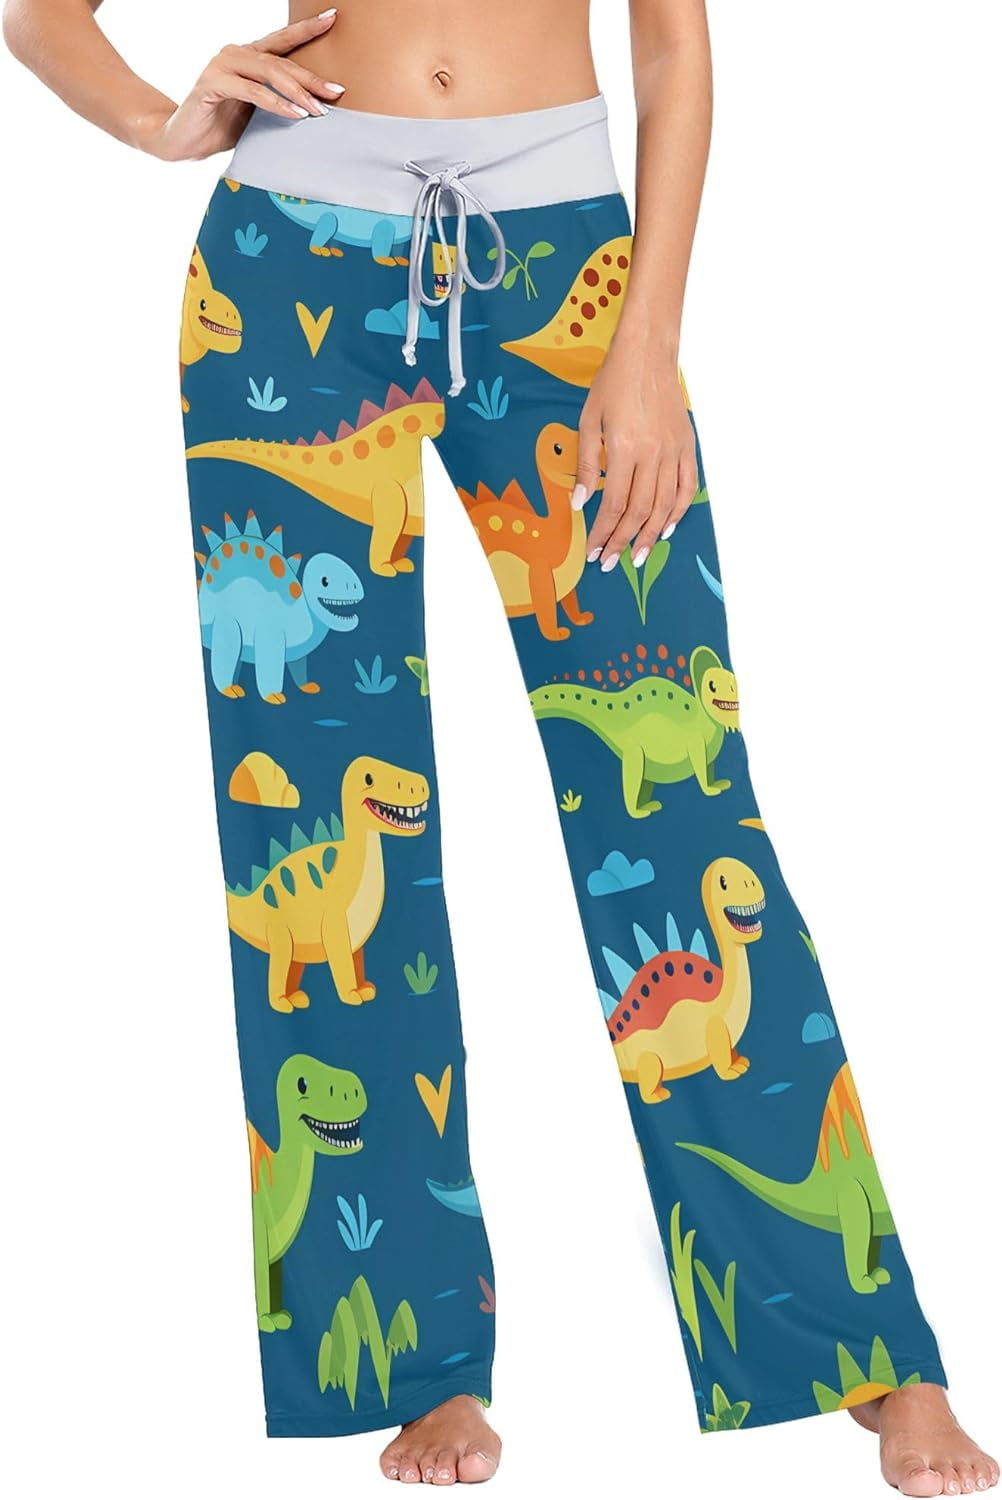 Cute Dinosaurs Blue Pajama Pants for Women Sleep Shorts with Drawstring  Boxers Sleepwear for Running, Multicolor, Medium : : Clothing,  Shoes & Accessories